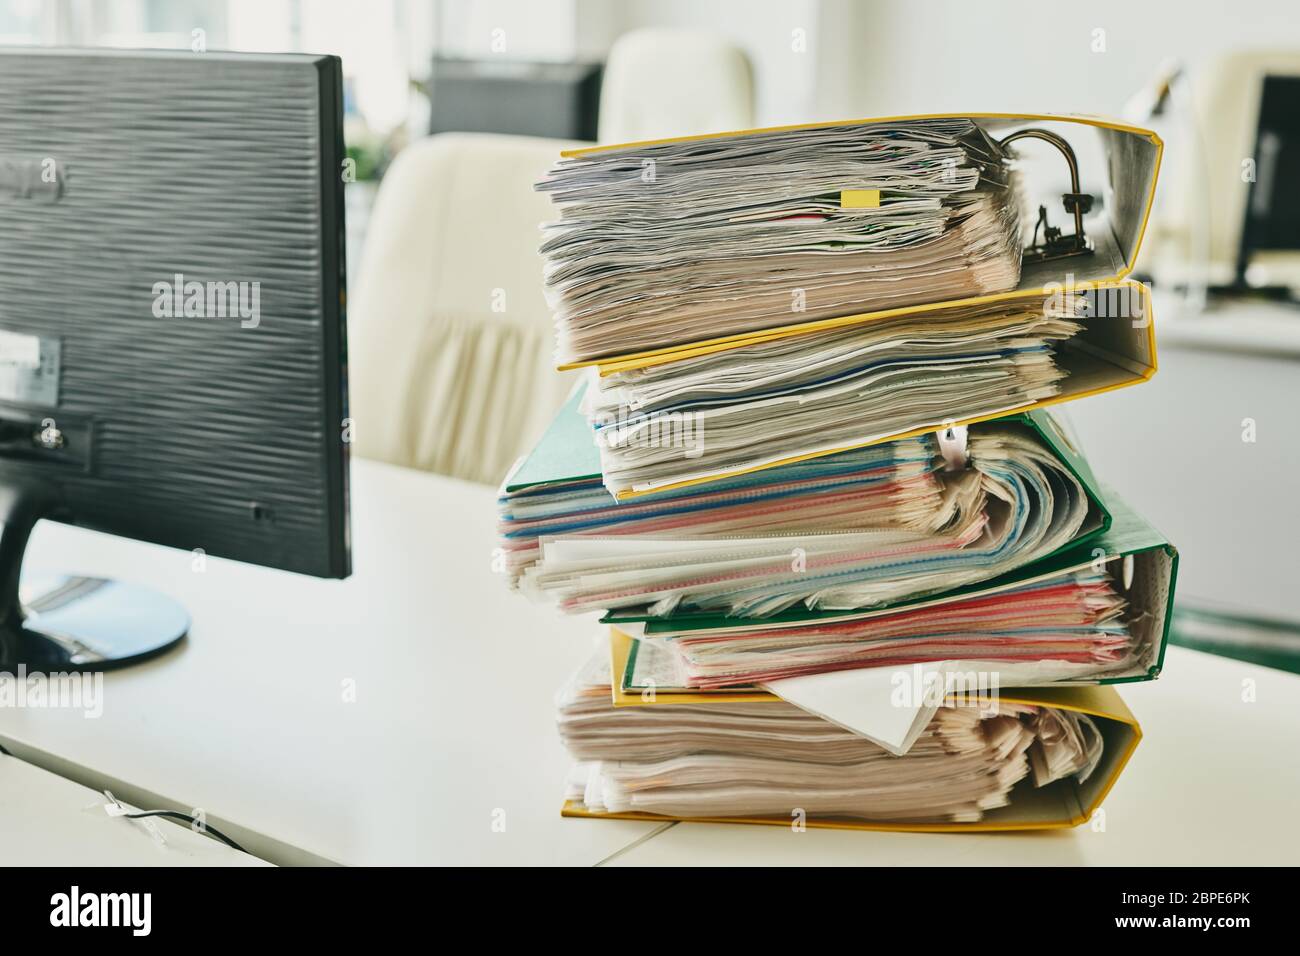 Backlog of cases after coronavirus isolation: colorful folders stacking on desk with laptop in office Stock Photo